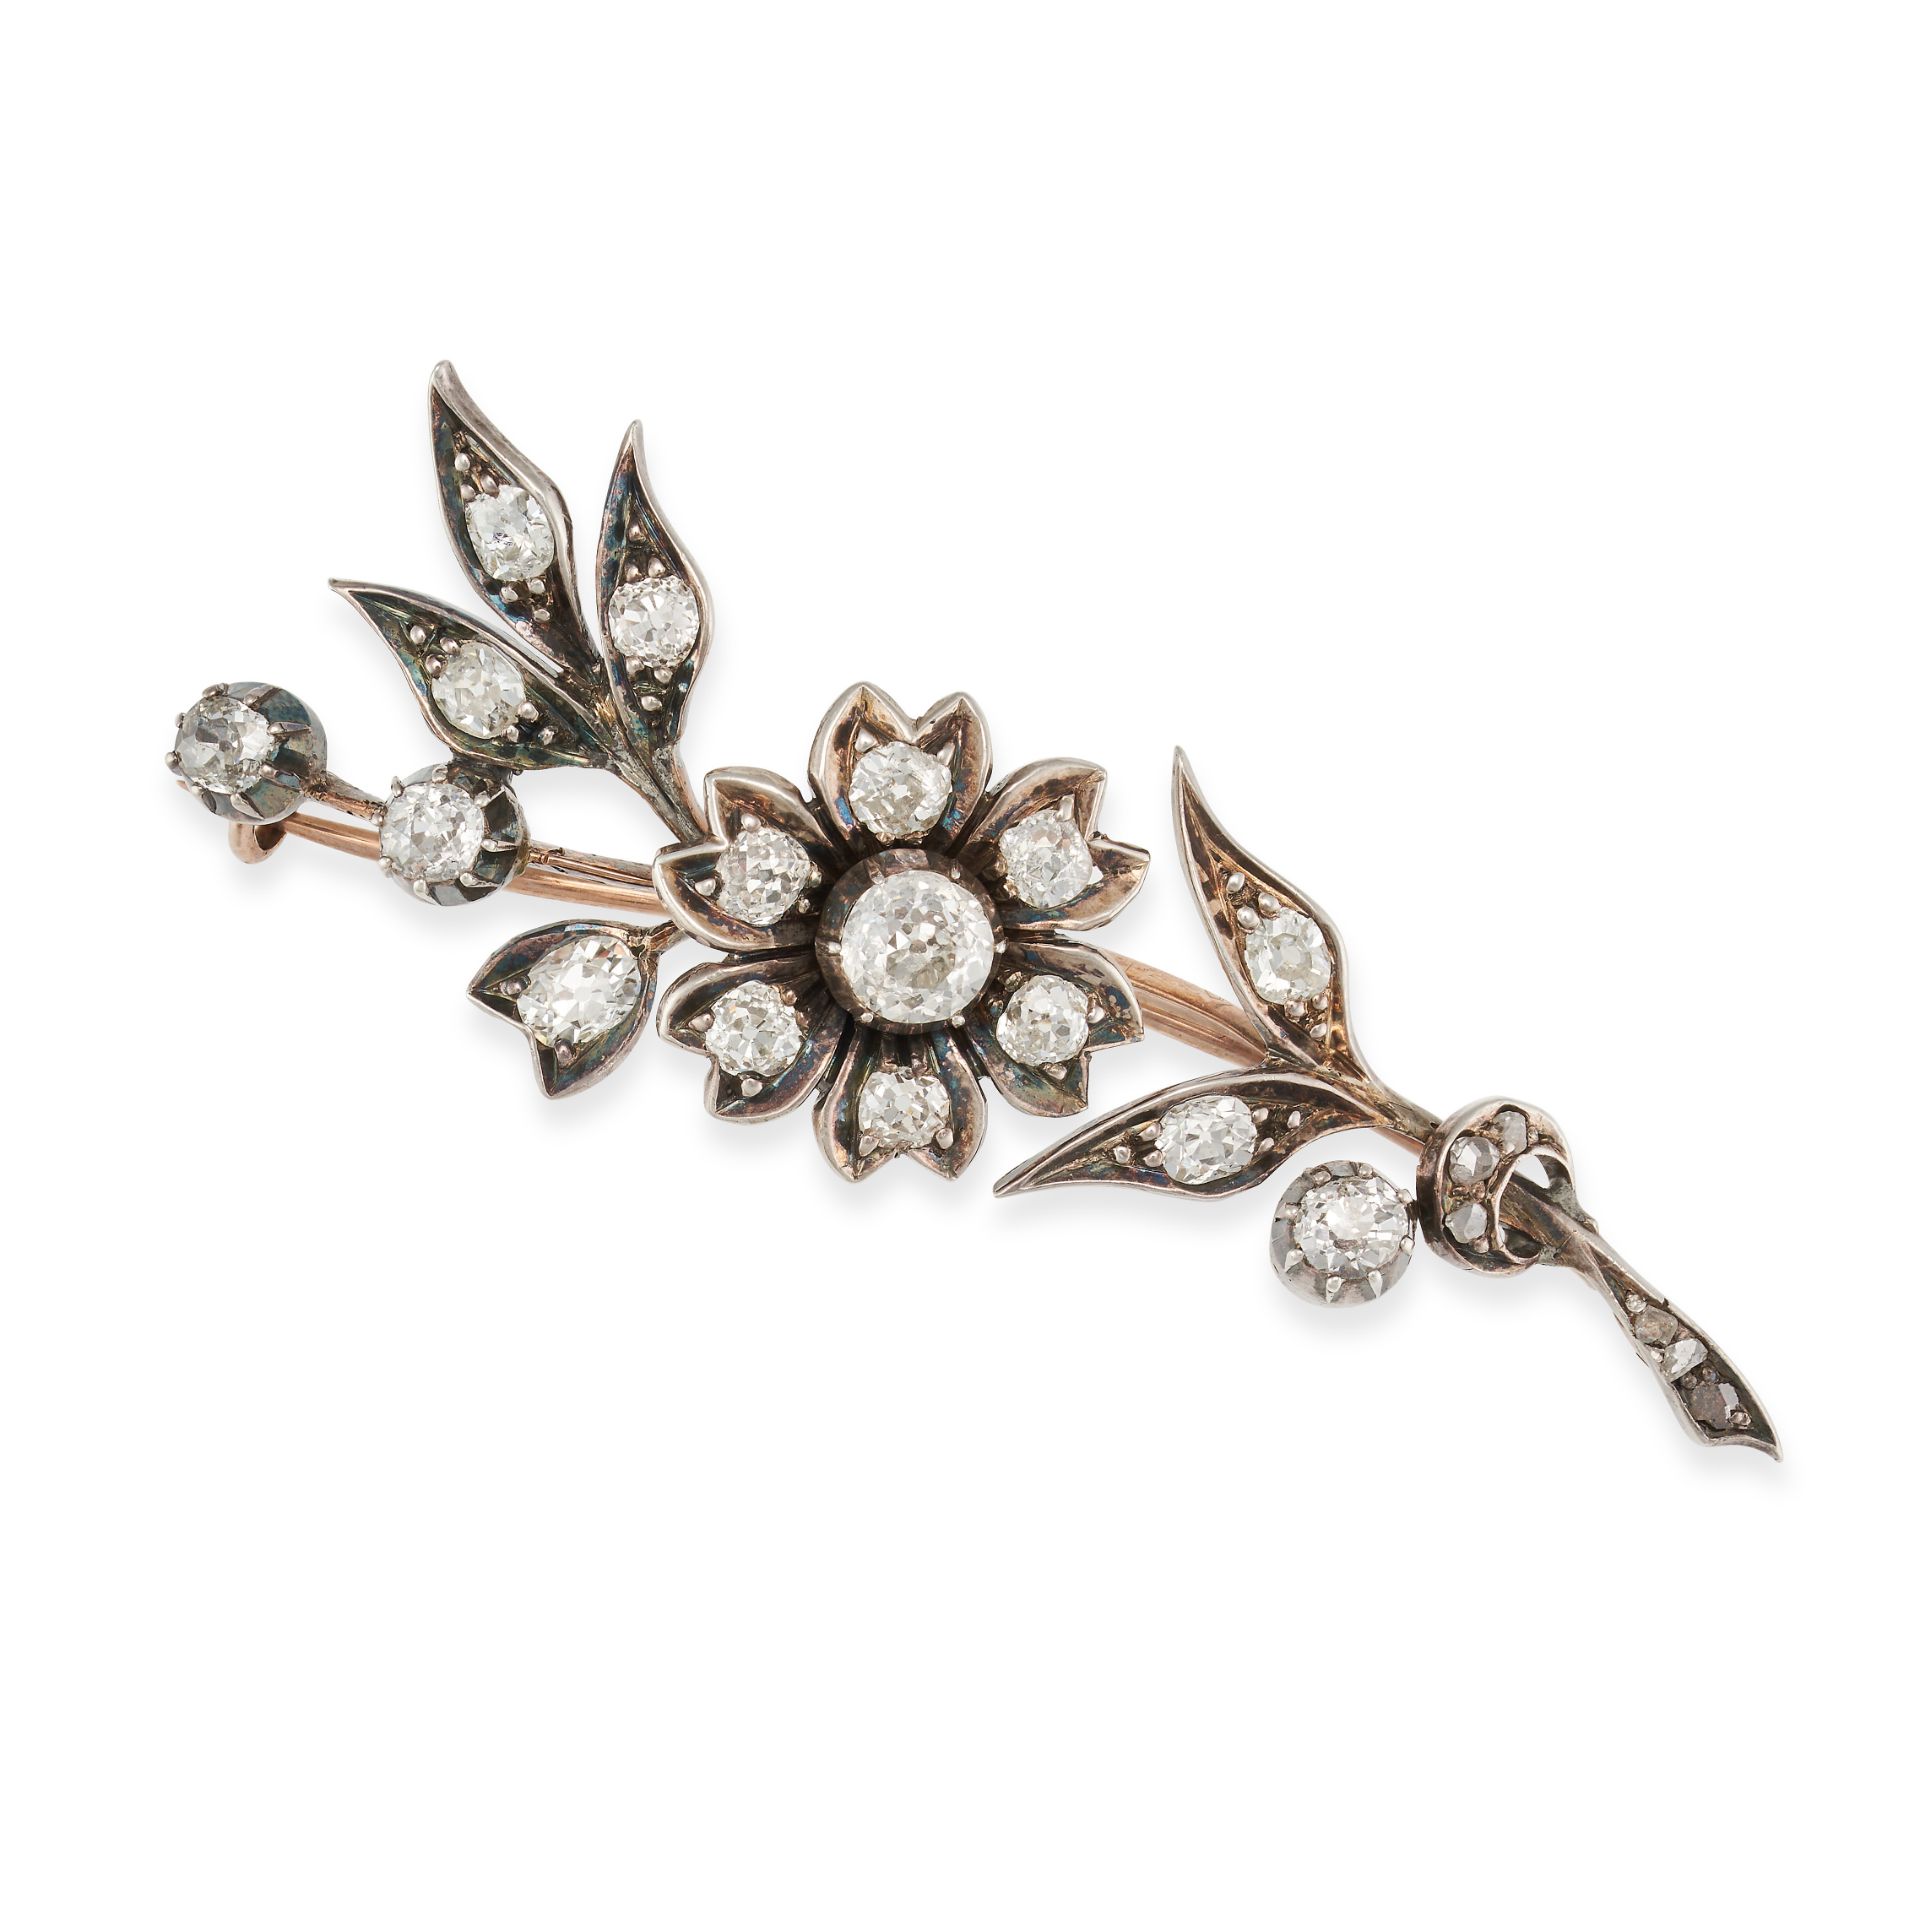 AN ANTIQUE DIAMOND FLOWER BROOCH in yellow gold and silver, designed as a floral spray set throug...